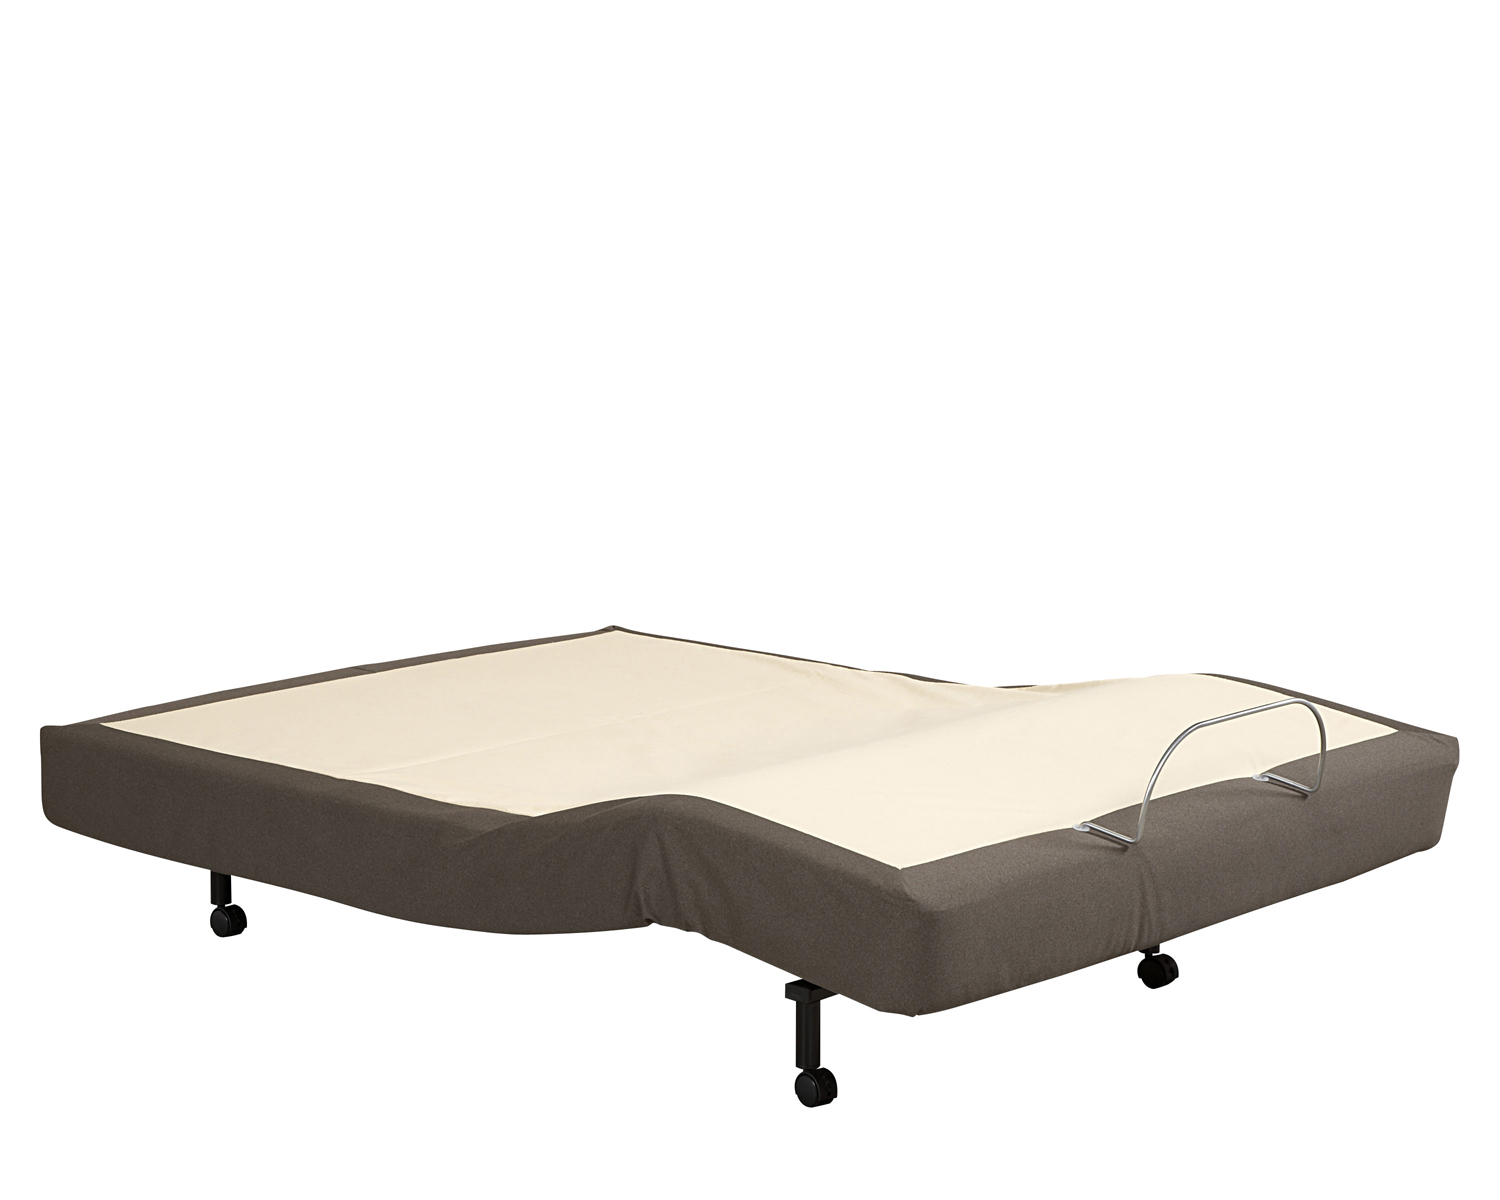 x - Embody by Sealy - Introspection Memory Foam Adjustable Bed